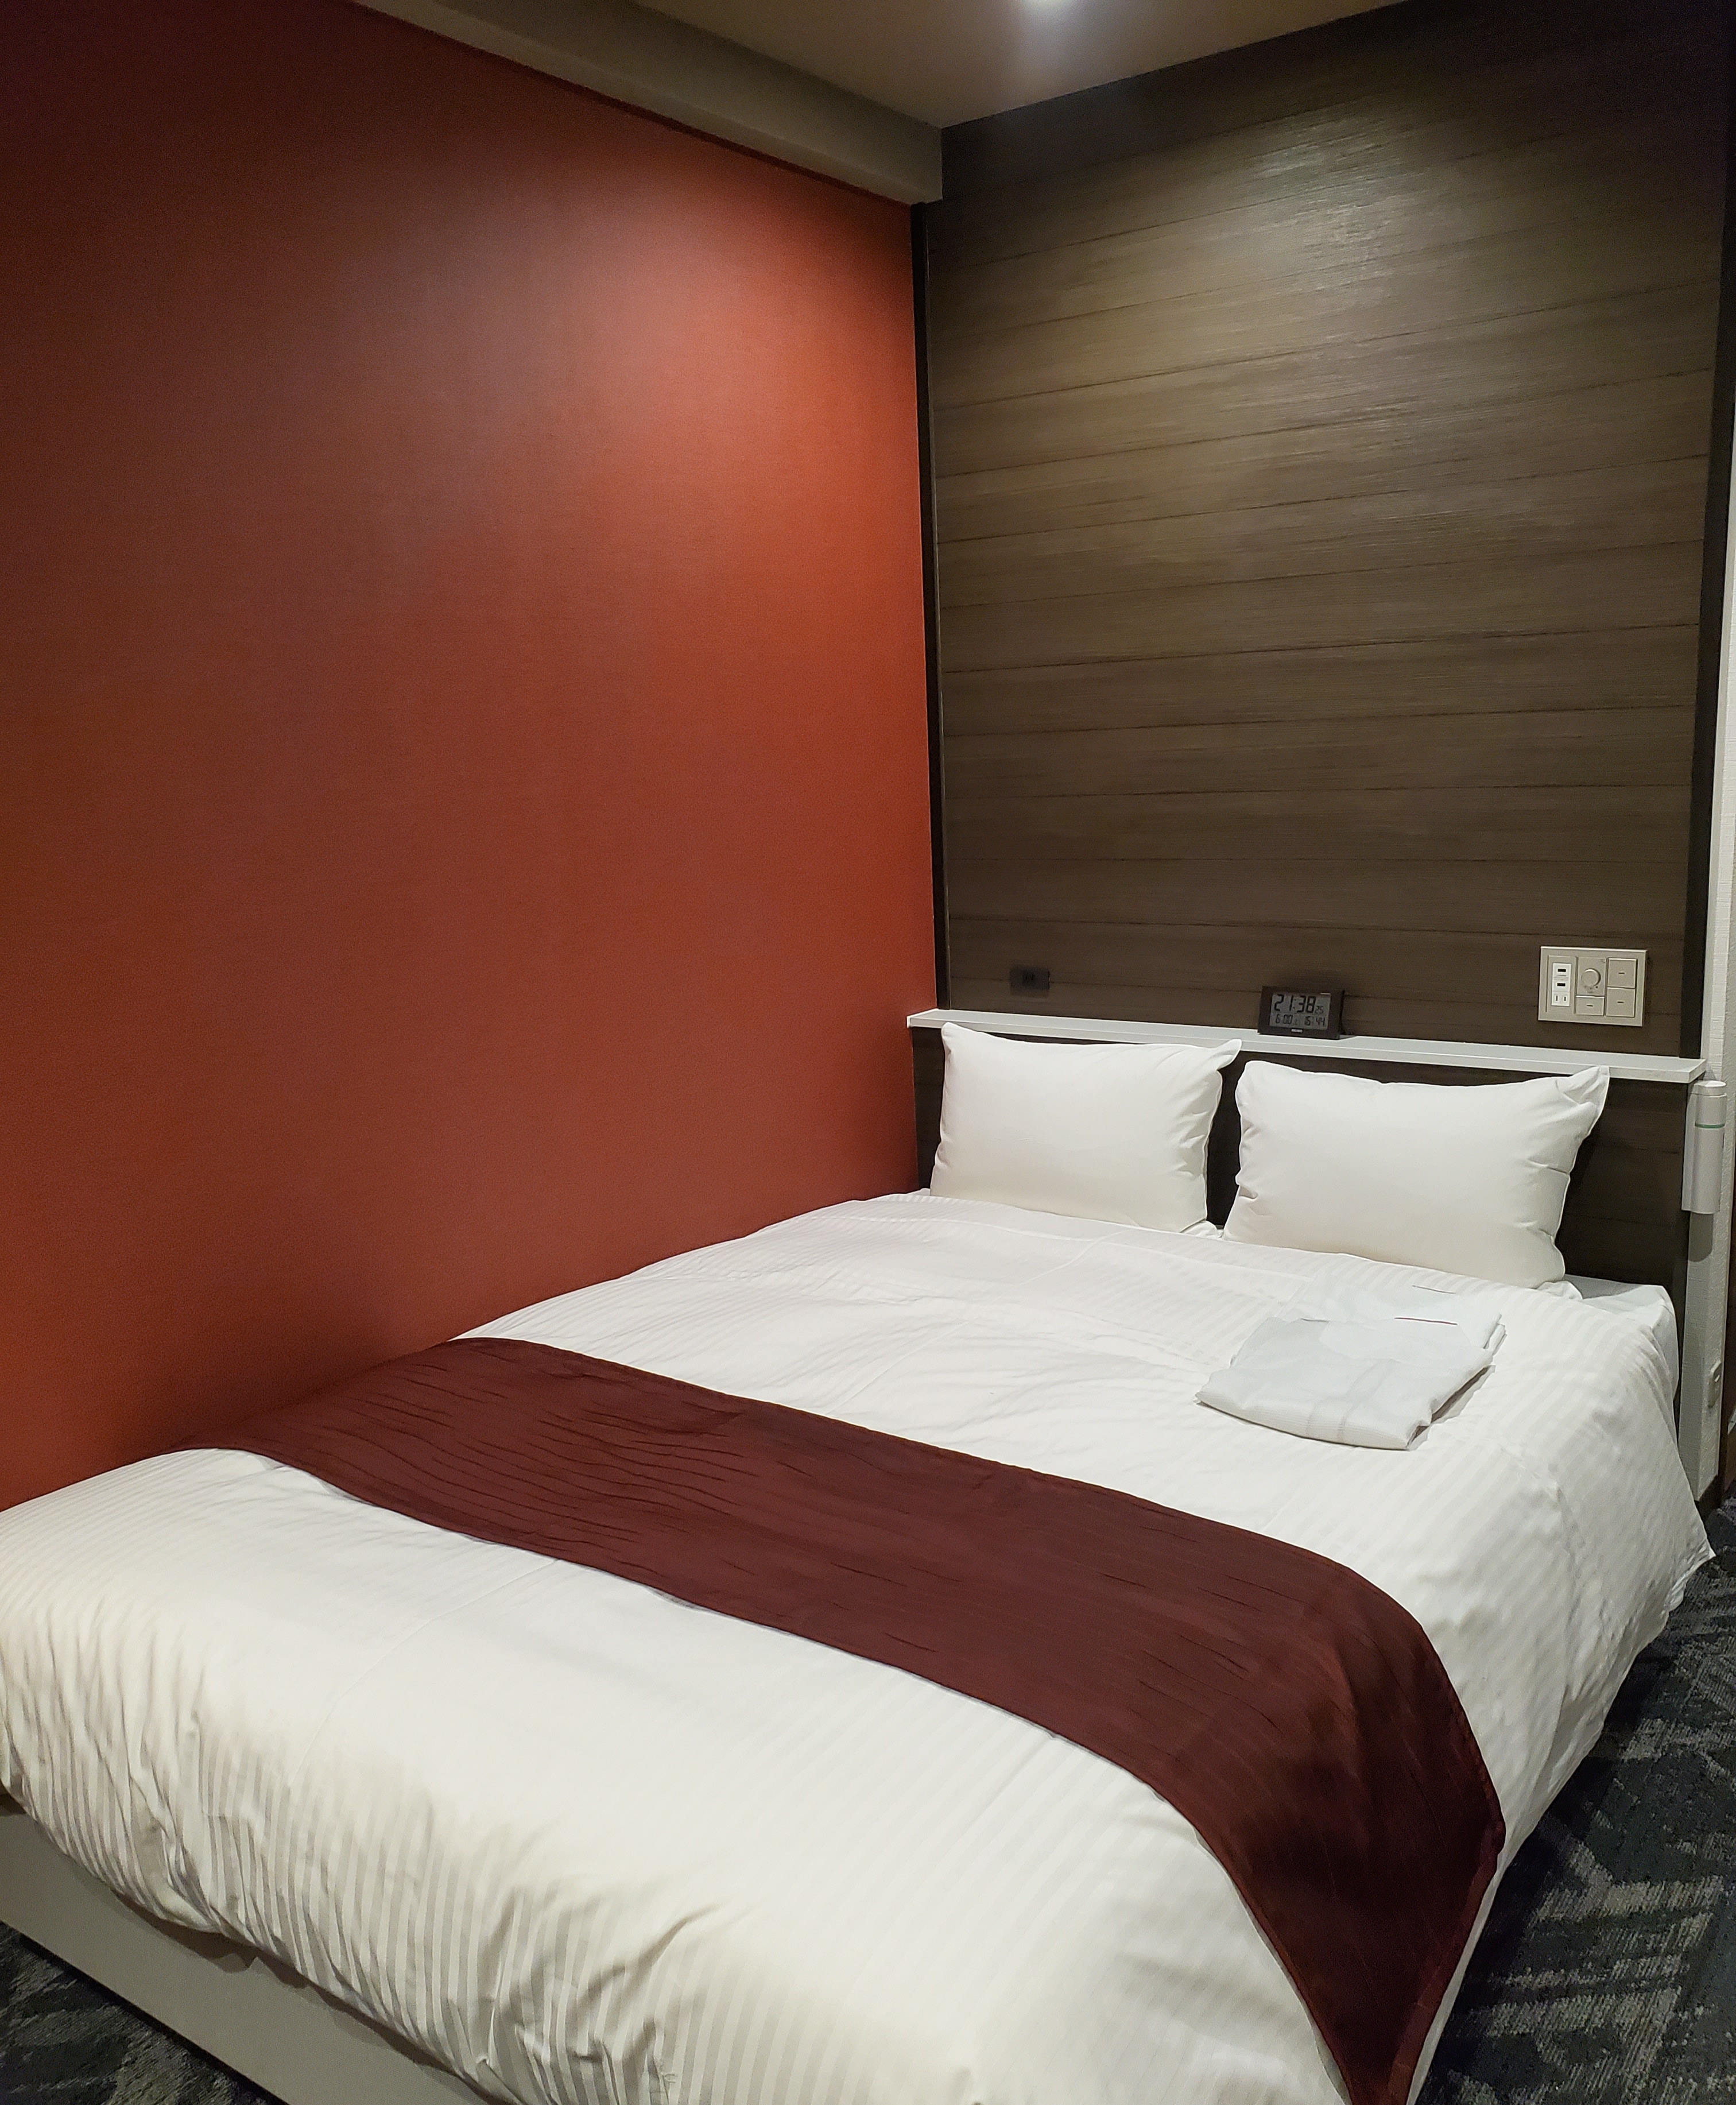 Renewal room: An example of a non-smoking single / semi-double room